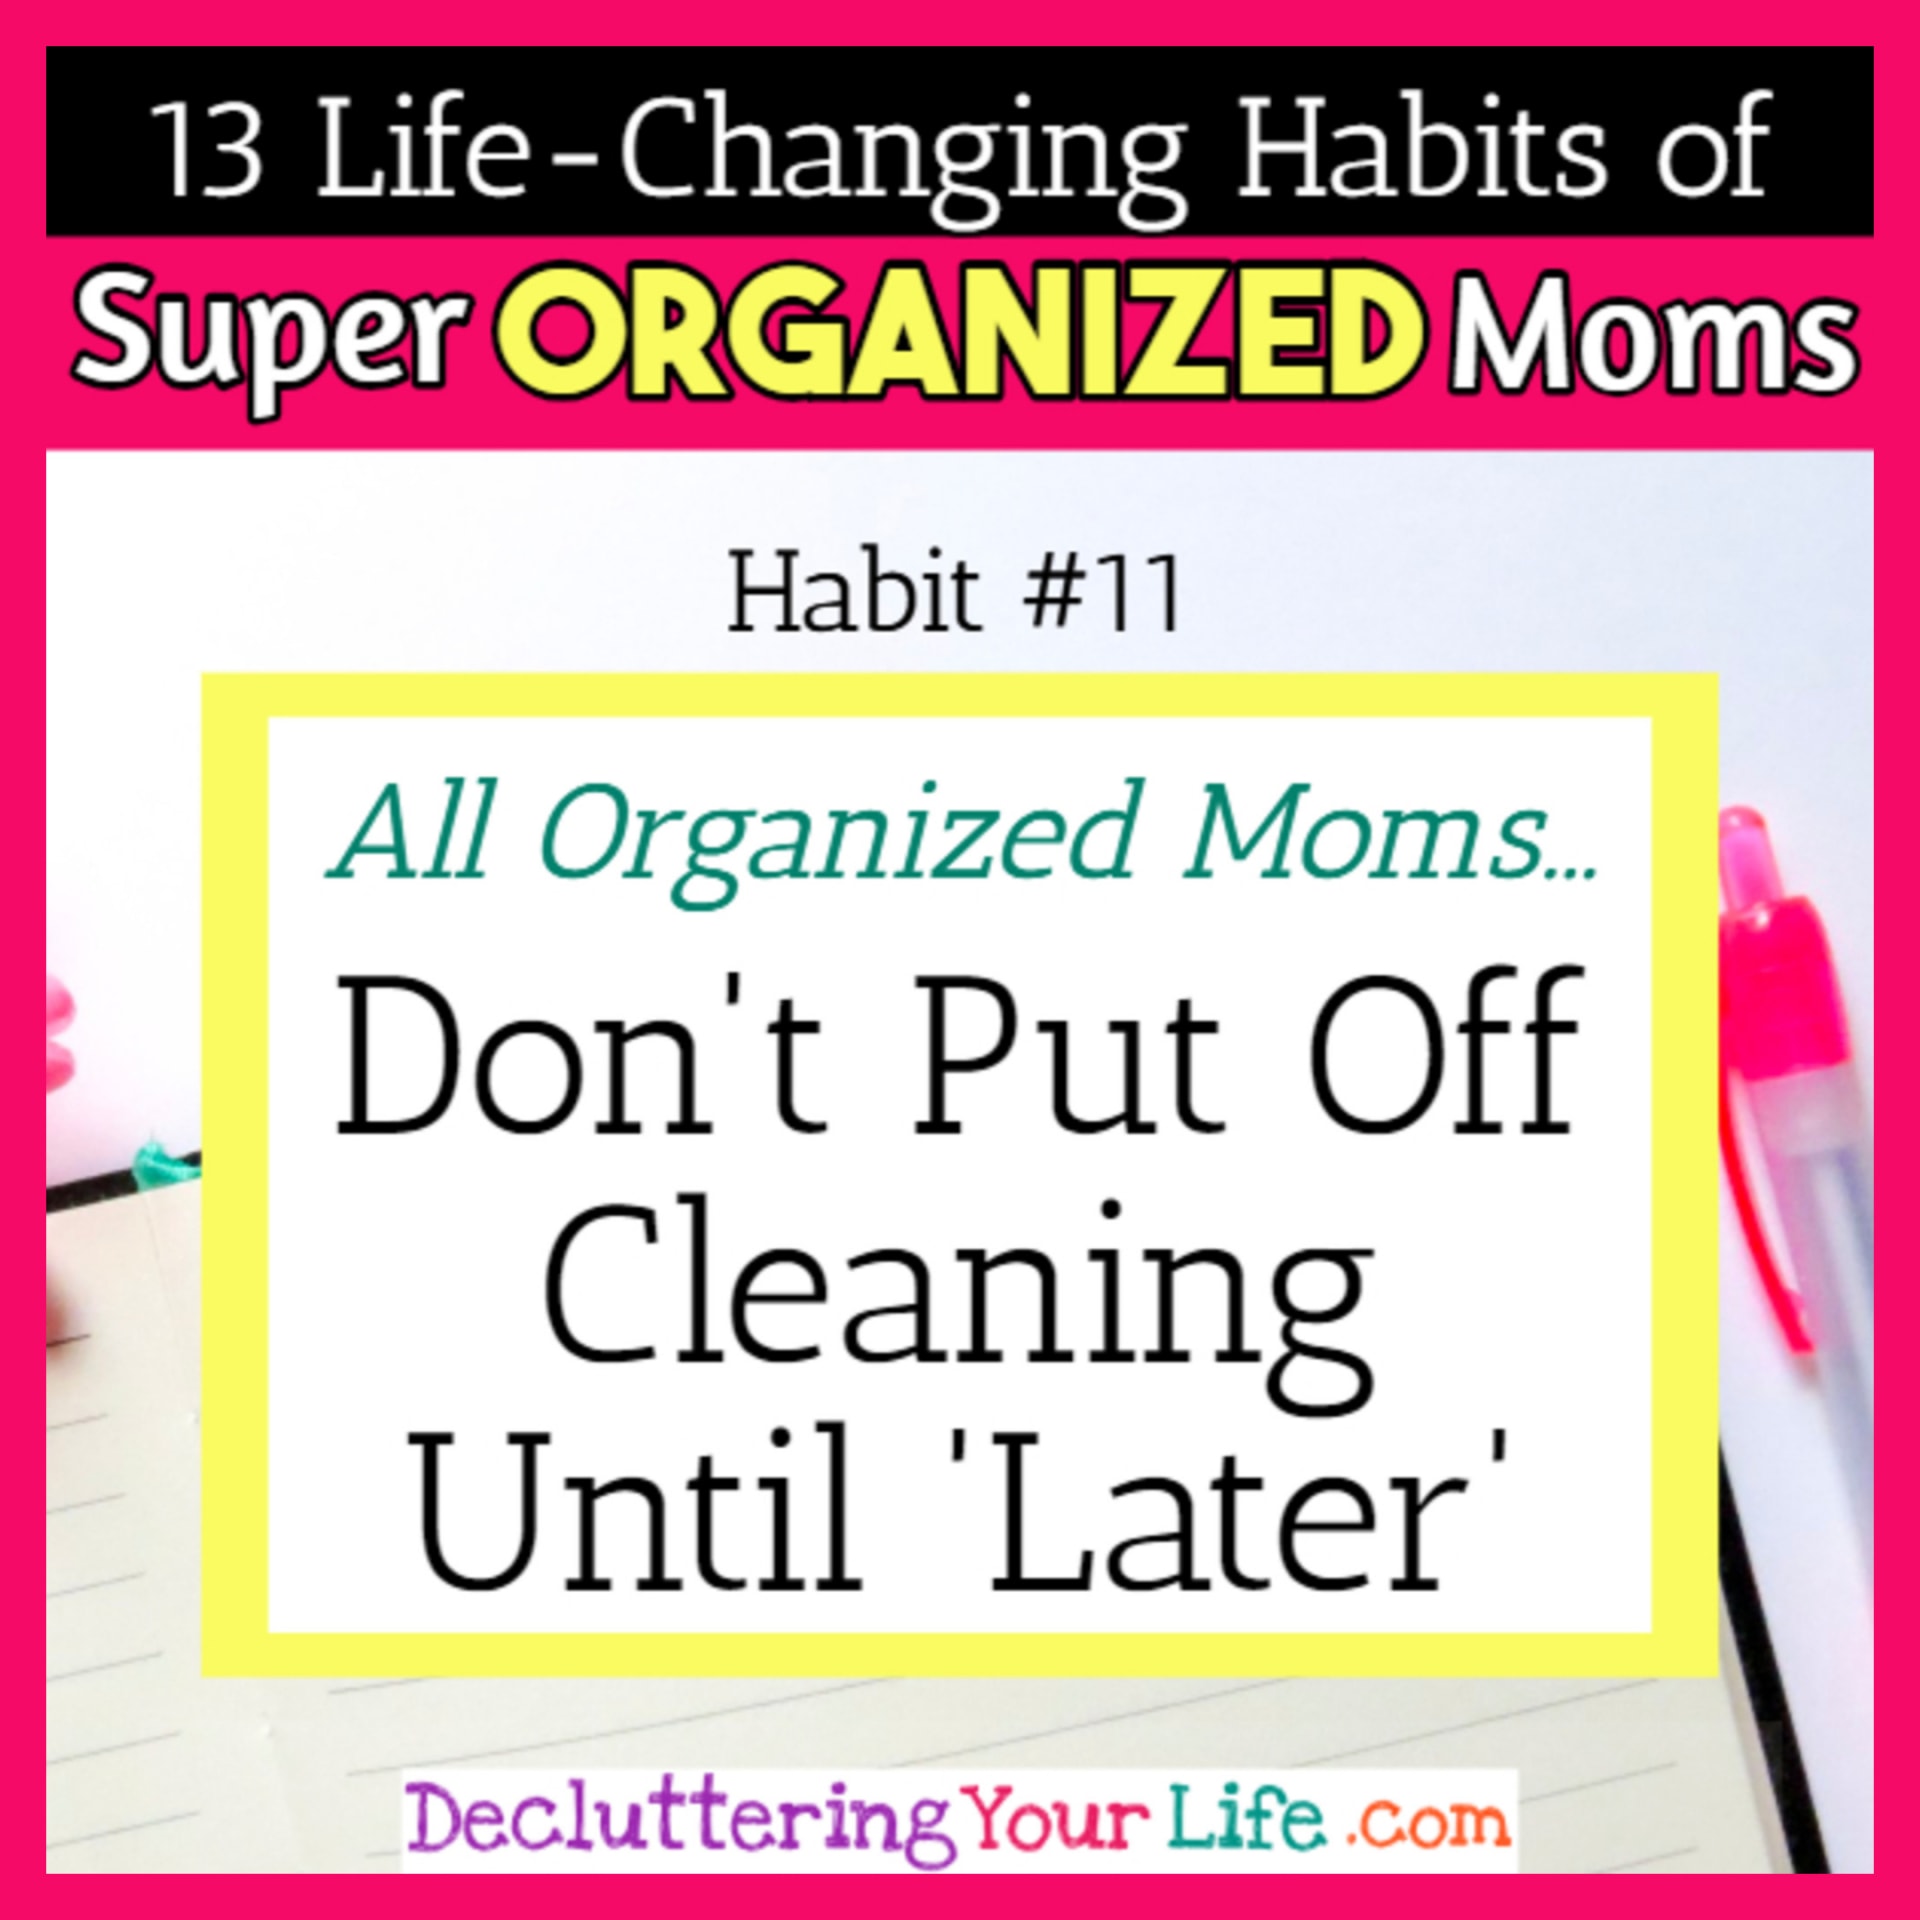 Organized moms know how to get motivated to clean - - 13 Habits of Super Organized Mom - How To Be An Organized Mom (whether you work OR stay at home)